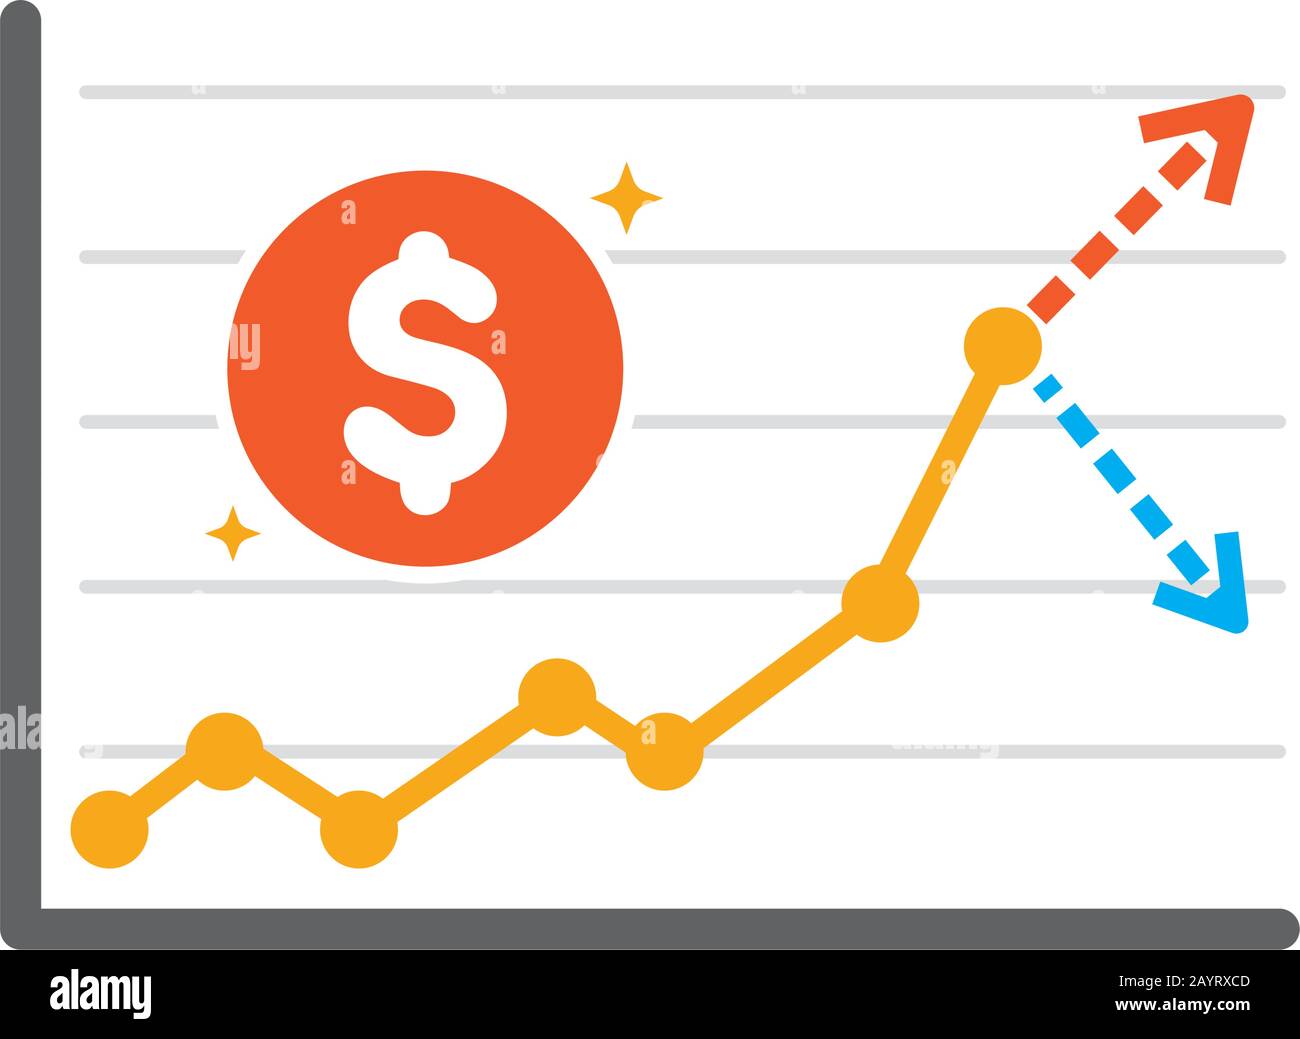 Up Down Financial Chart Illustration Stock Vector Images Alamy